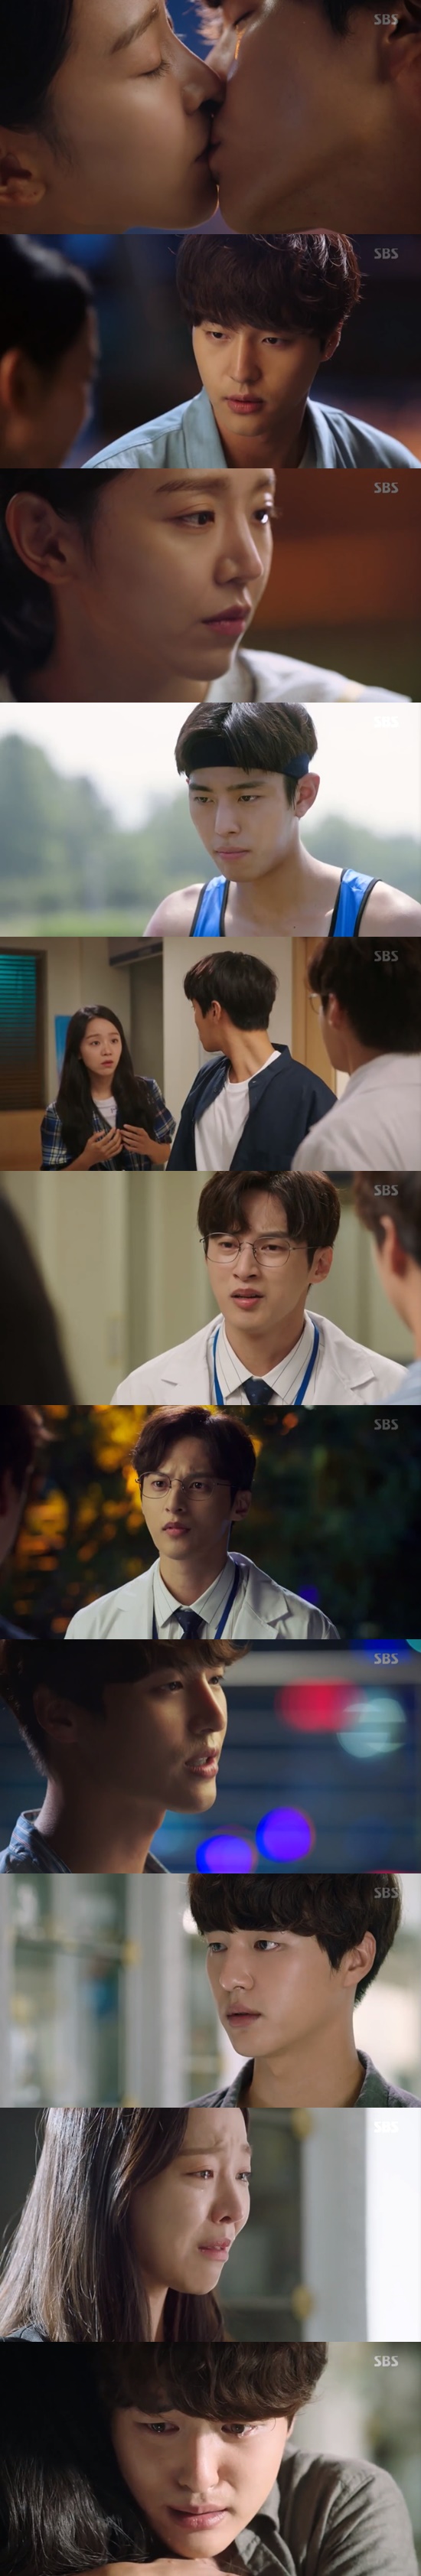 Thirty but seventeen recorded its highest ratings.According to Nielsen Korea, a ratings agency on November 11, the SBS monthly drama Thirty but Seventeen was 9.5% and 10.9% nationwide.This is higher than last broadcast (9.3%, 10.8%) and it has renewed its highest audience rating by a slight difference.MBC s romance was broadcast at similar times, 2.8%, 3.0%, Lovely Horrible was 3.4% and 3.7%.On the day of Thirty but Seventeen, Usari (Shin Hye-sun) found out that Noh Su-mi was dead. Usuri told Kim Hyung-tae (Yoon Sun-woo) that It is not a big accident.Where is Sumy? Kim Hyung-tae could not keep her side because of the operation schedule, and Utheri sat alone on the bench and was sore.Gong Woo-jin (Yang Se-jong) found Ussari late and hugged him.After that, Gong Woo-jin and Usuri headed to the crypt of NoSumy. Usuri poured tears, saying, Im here. Hulan frost. Sumyya. At this time, Gong Woo-jin heard the name NoSumy and recalled his past memories.Gong Woo-jin was mistaken for the name of the young Usuri (Park Si-eun) as NoSumy (Lee Seo-yeon). Gong Woo-jin embraced Usuri and said, My name was Usuri; I was alive.Thank you for living, he confessed.Photo: SBS Broadcasting Screen